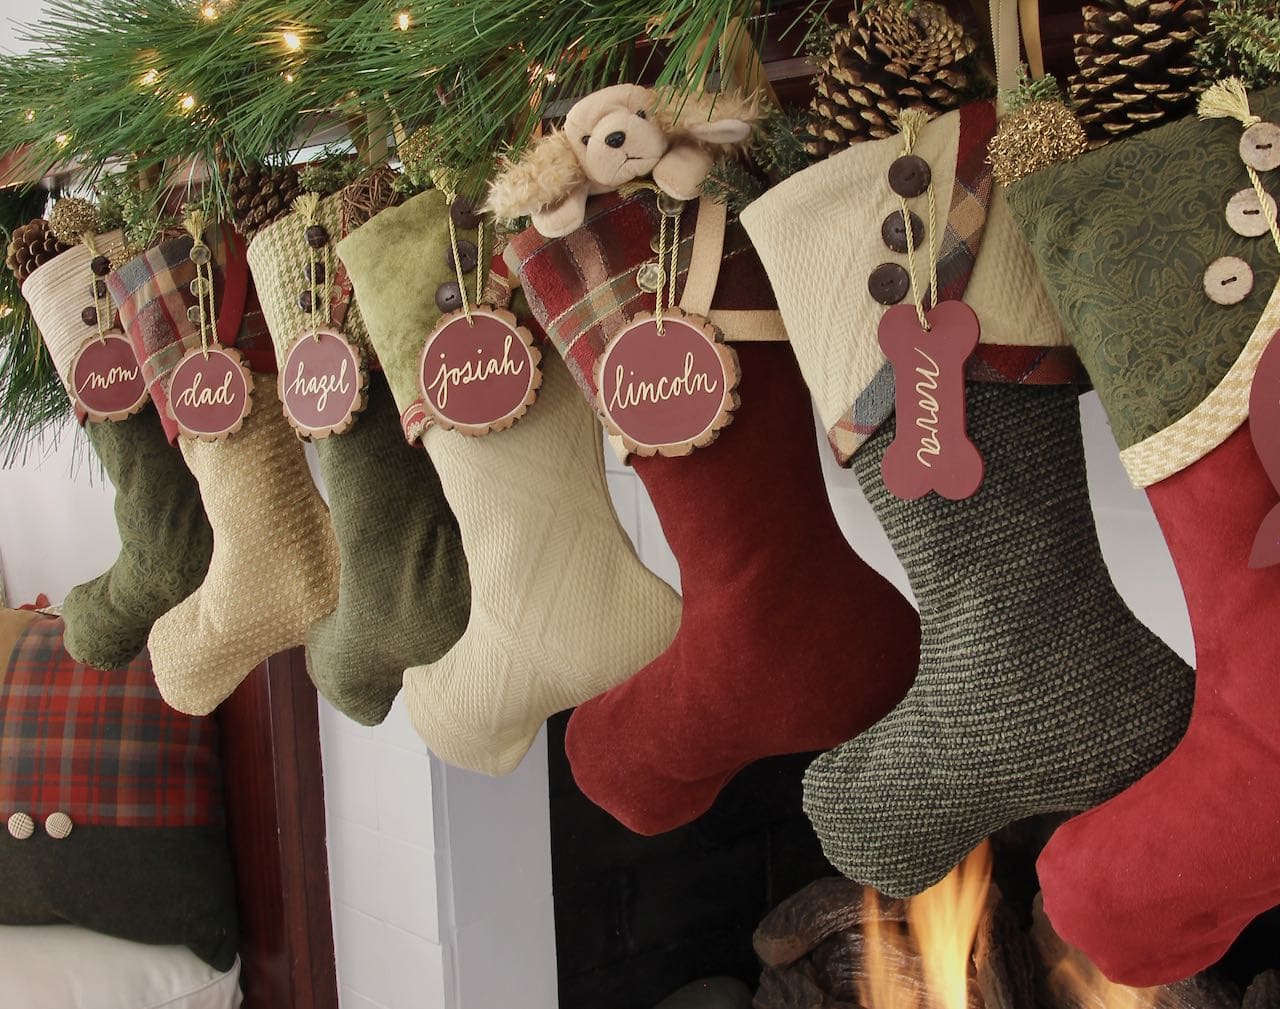 Row of 7 Deep Traditions Christmas Stockings all with burgundy tree slice name tags hanging from the top button on their cuffs